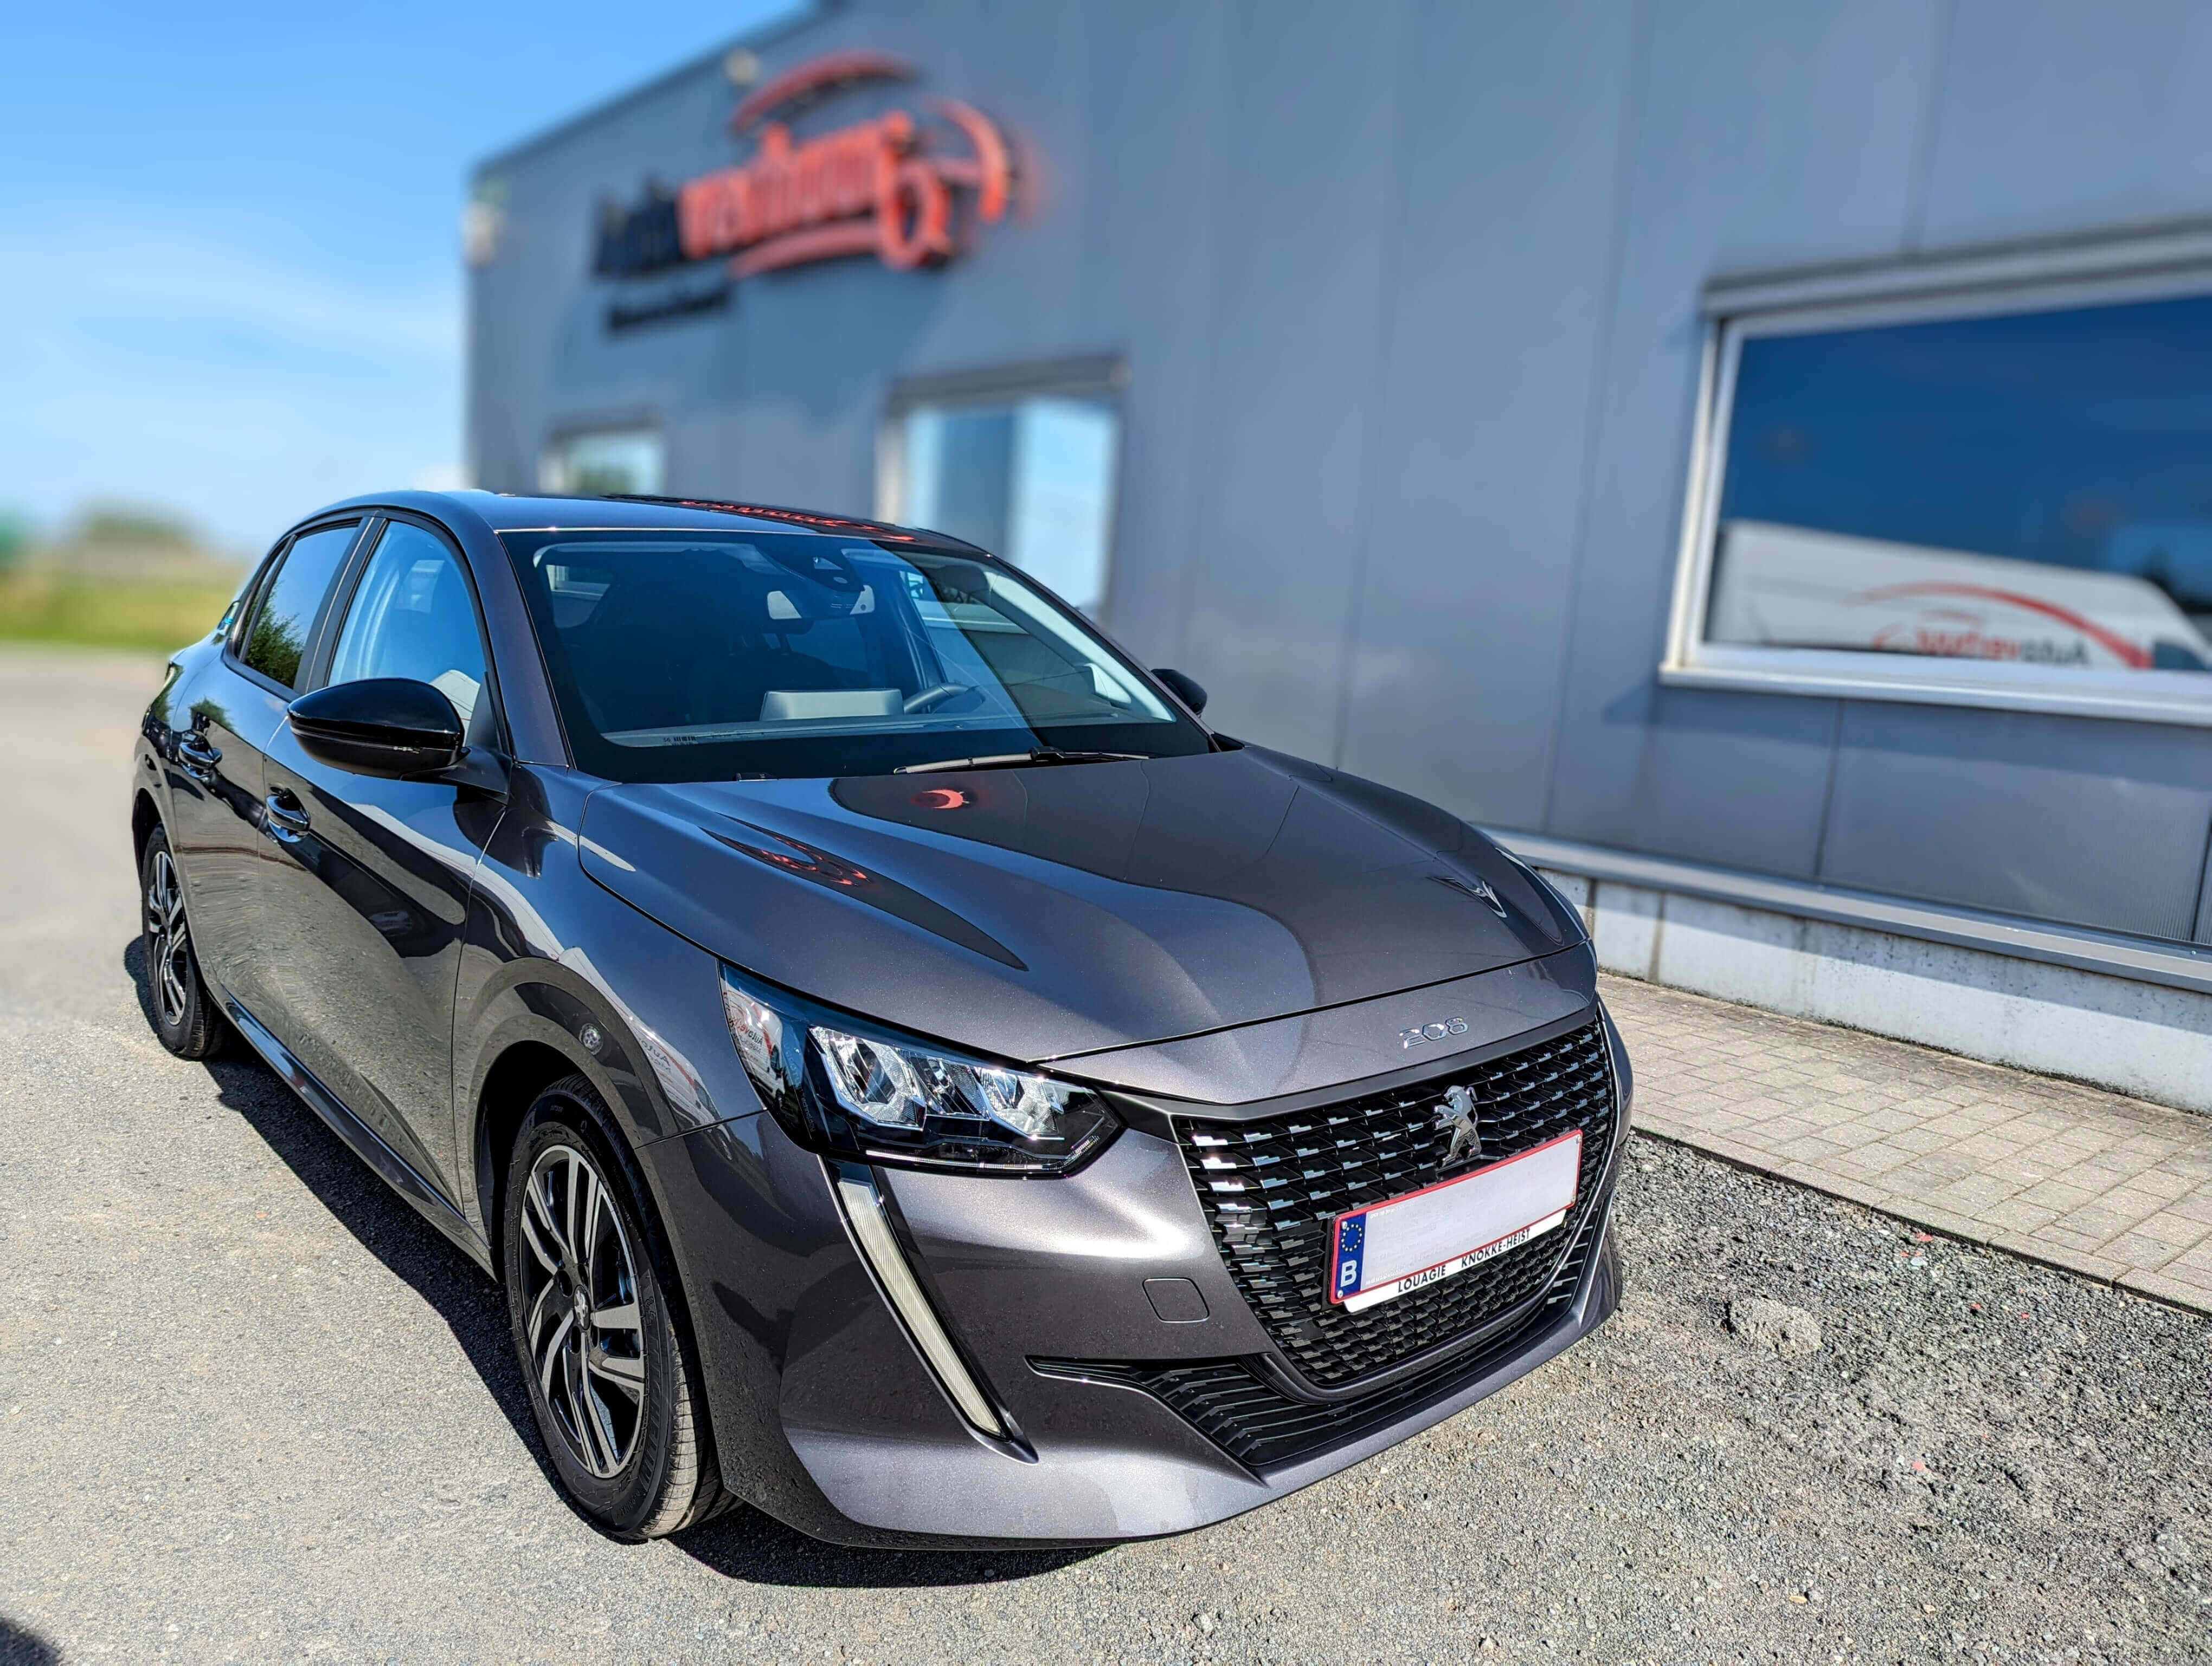 Interior view of the Peugeot 208 - Experience comfort and innovative features during your drive.